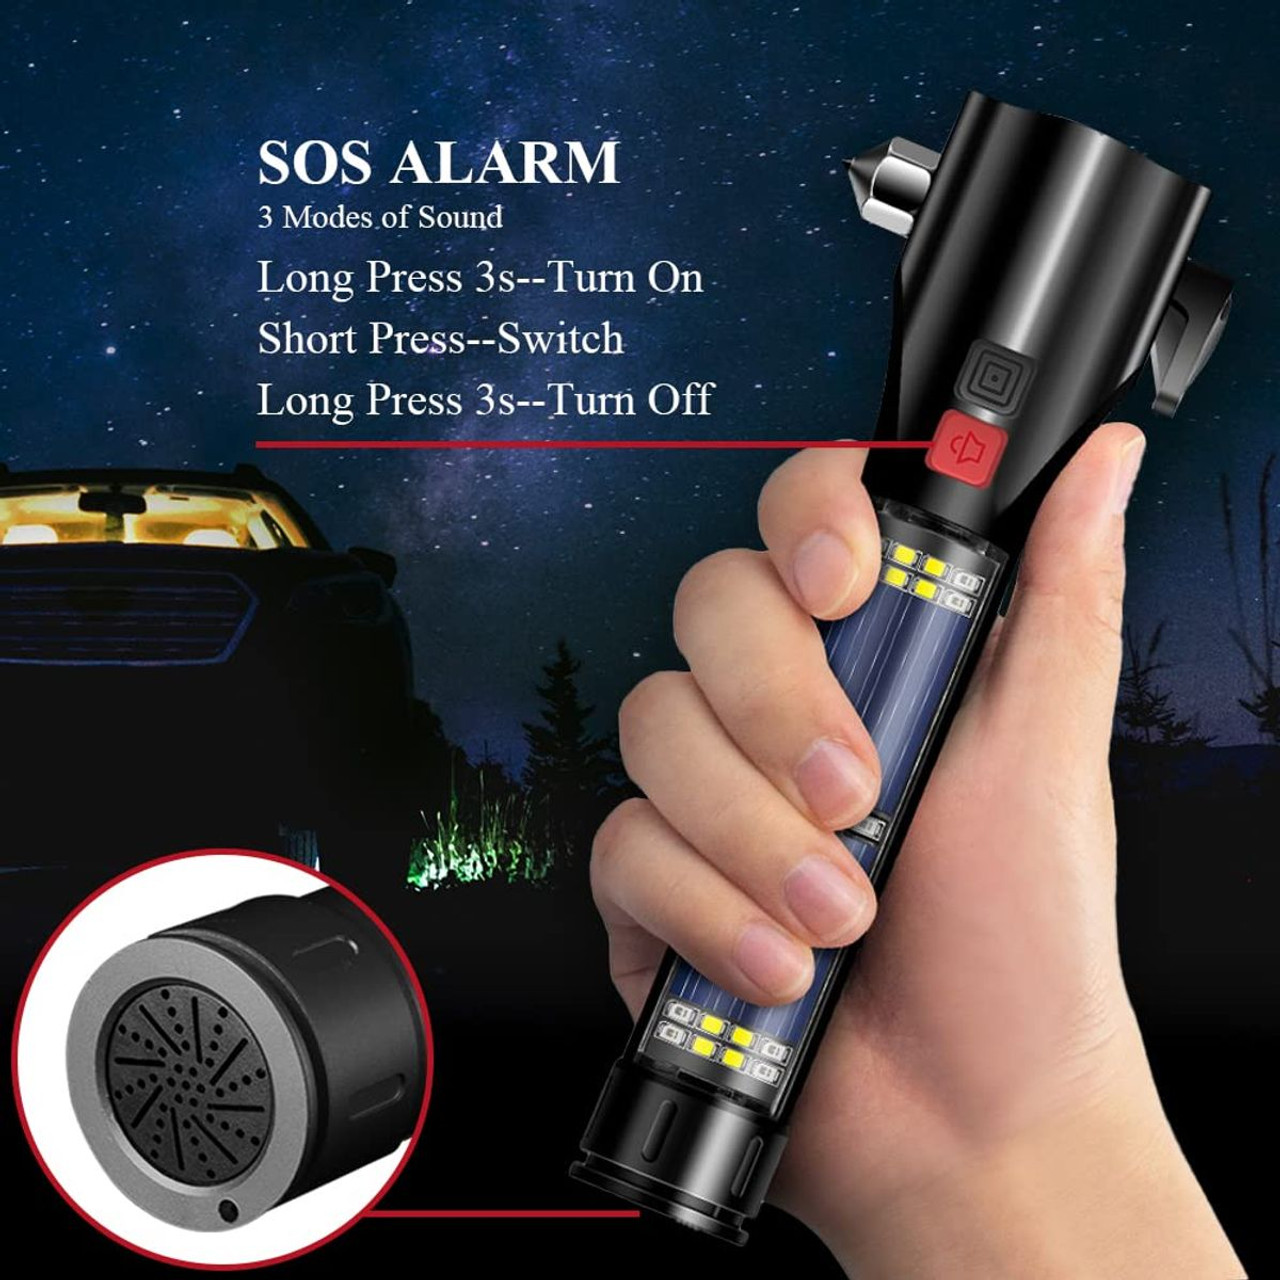 Car Safety Hammer Flashlight  LED High Lumens Rechargeable Solar Powered Escape Kit, Window Glass Breaker and Seatbelt Cutter(Black) product image